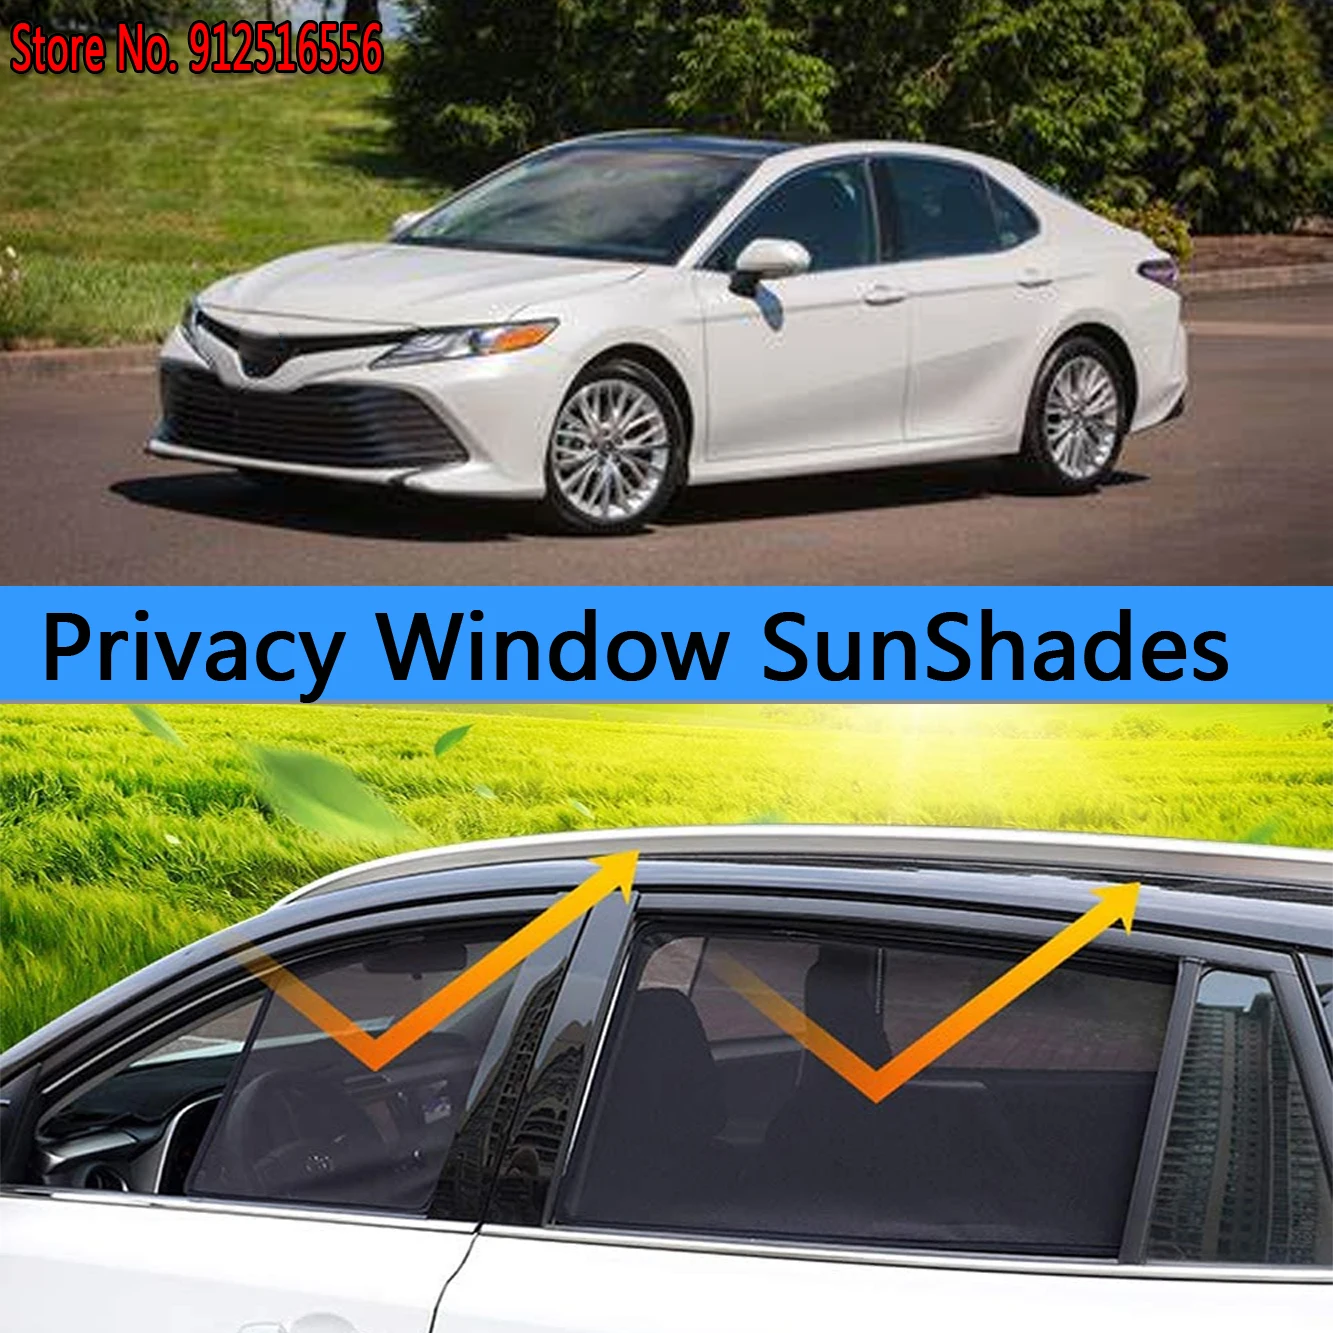 Side Sun Shade Shading Curtain Protection Window SunShades Sunshield Accseeories For Toyota Camry 70 XV70 2018 2019 2021 2022